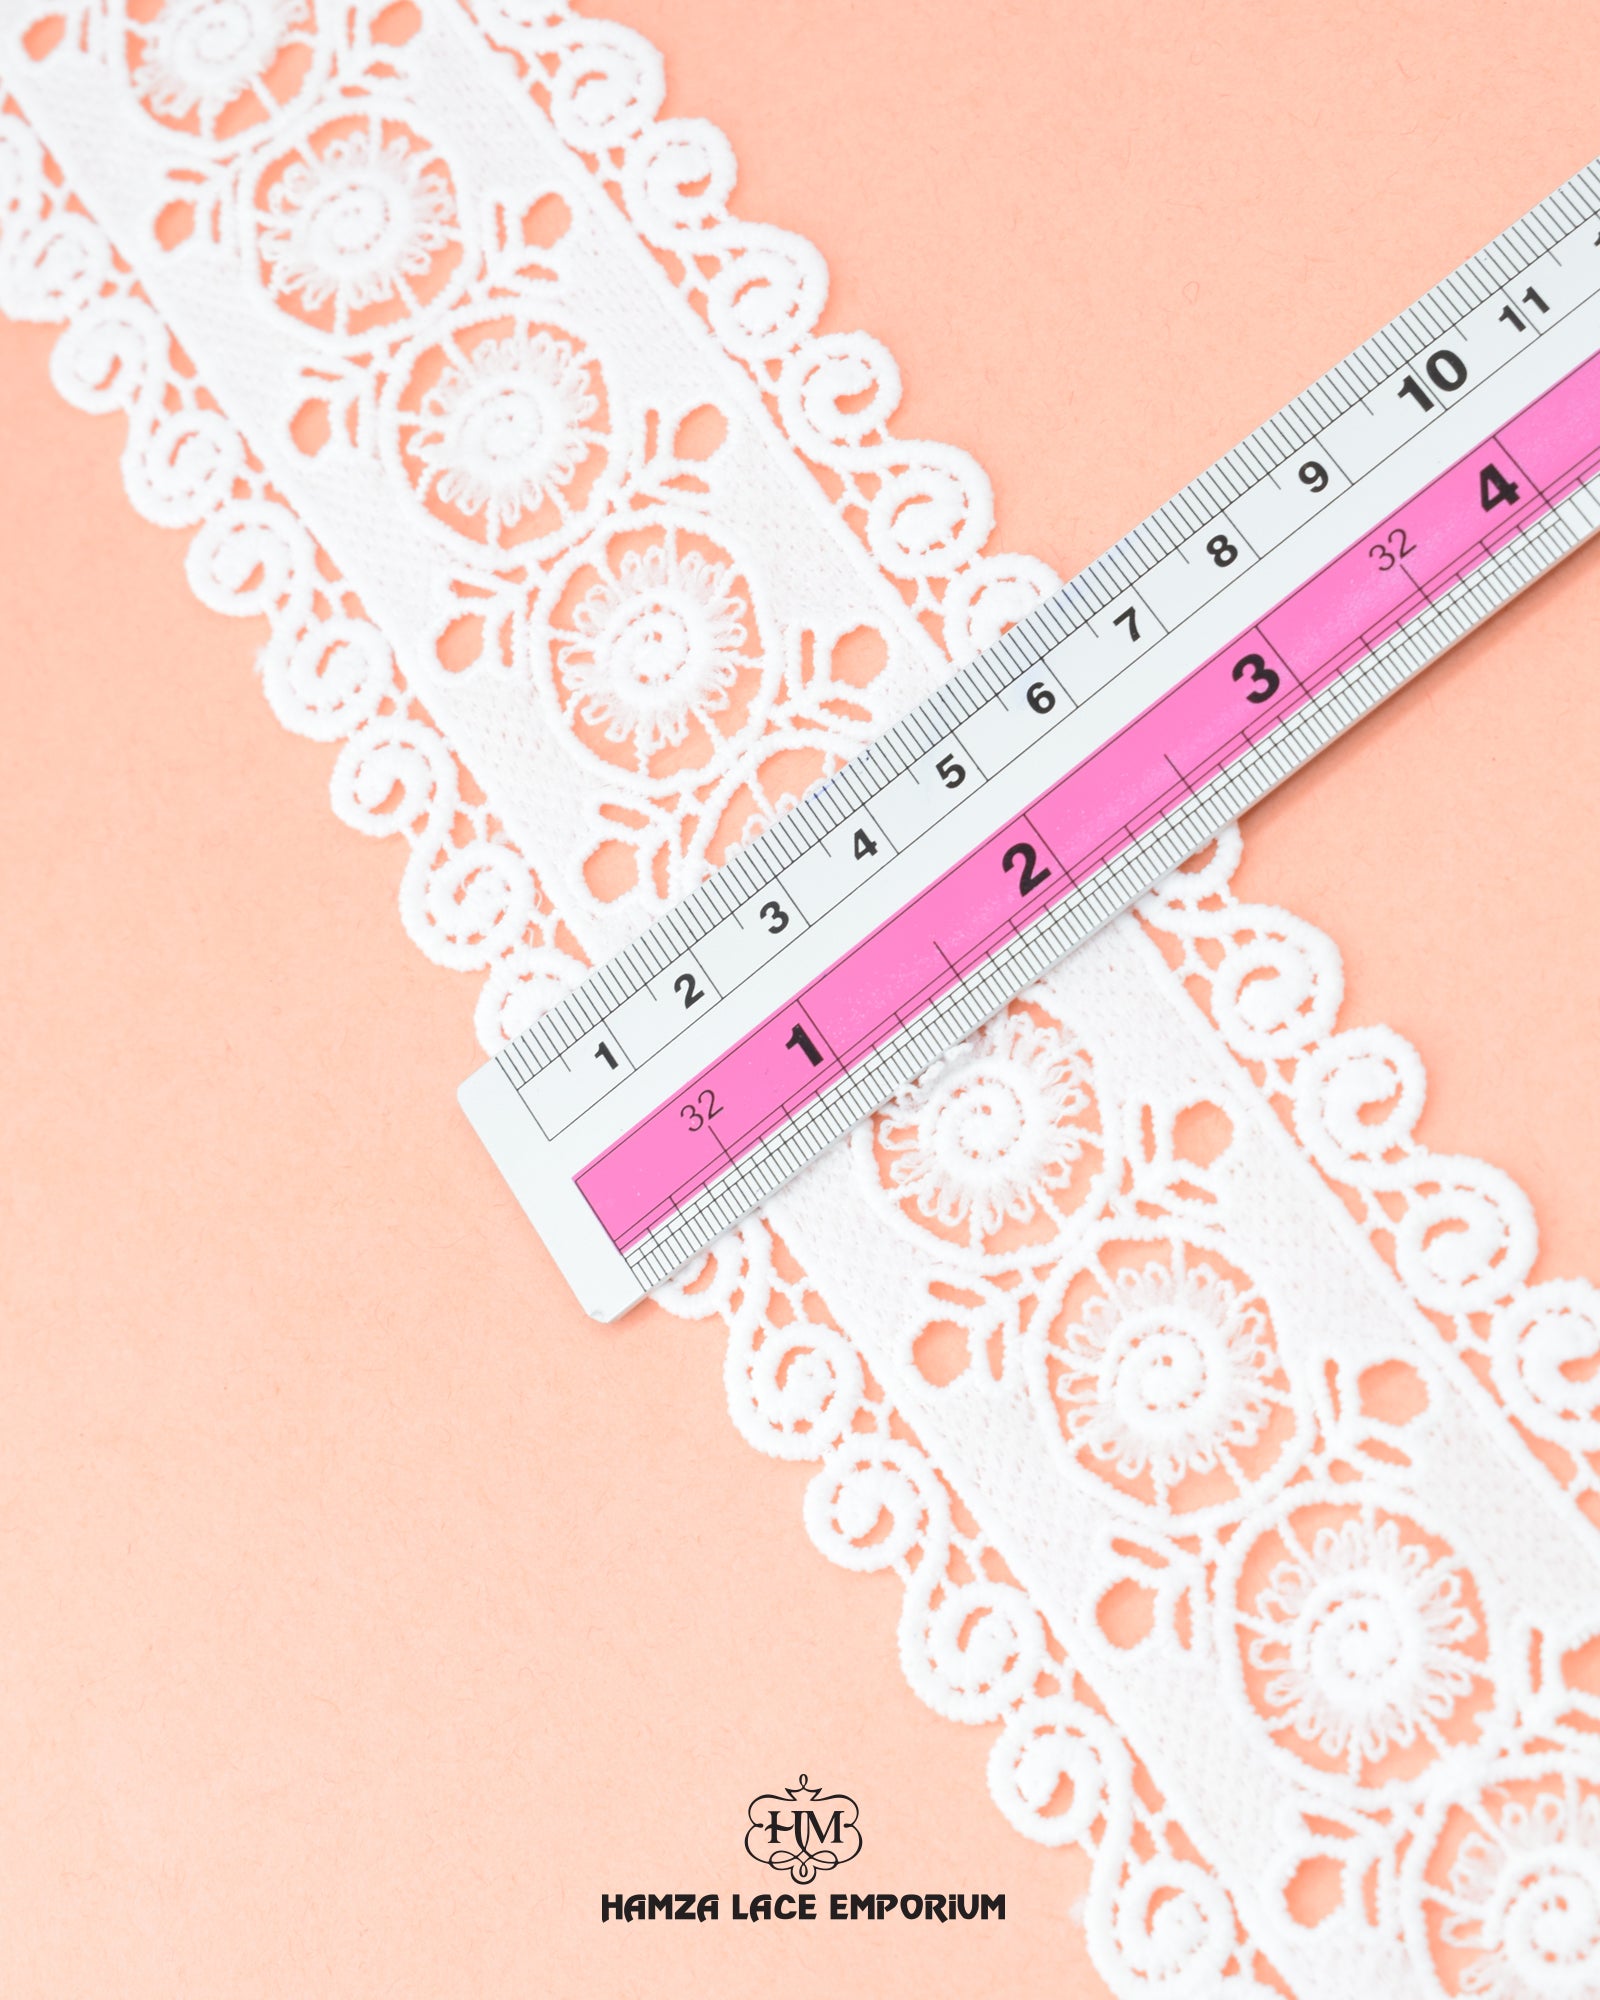 Size of the 'Two Side Border Lace 23014' is shown as '2.5' inches with the help of a ruler